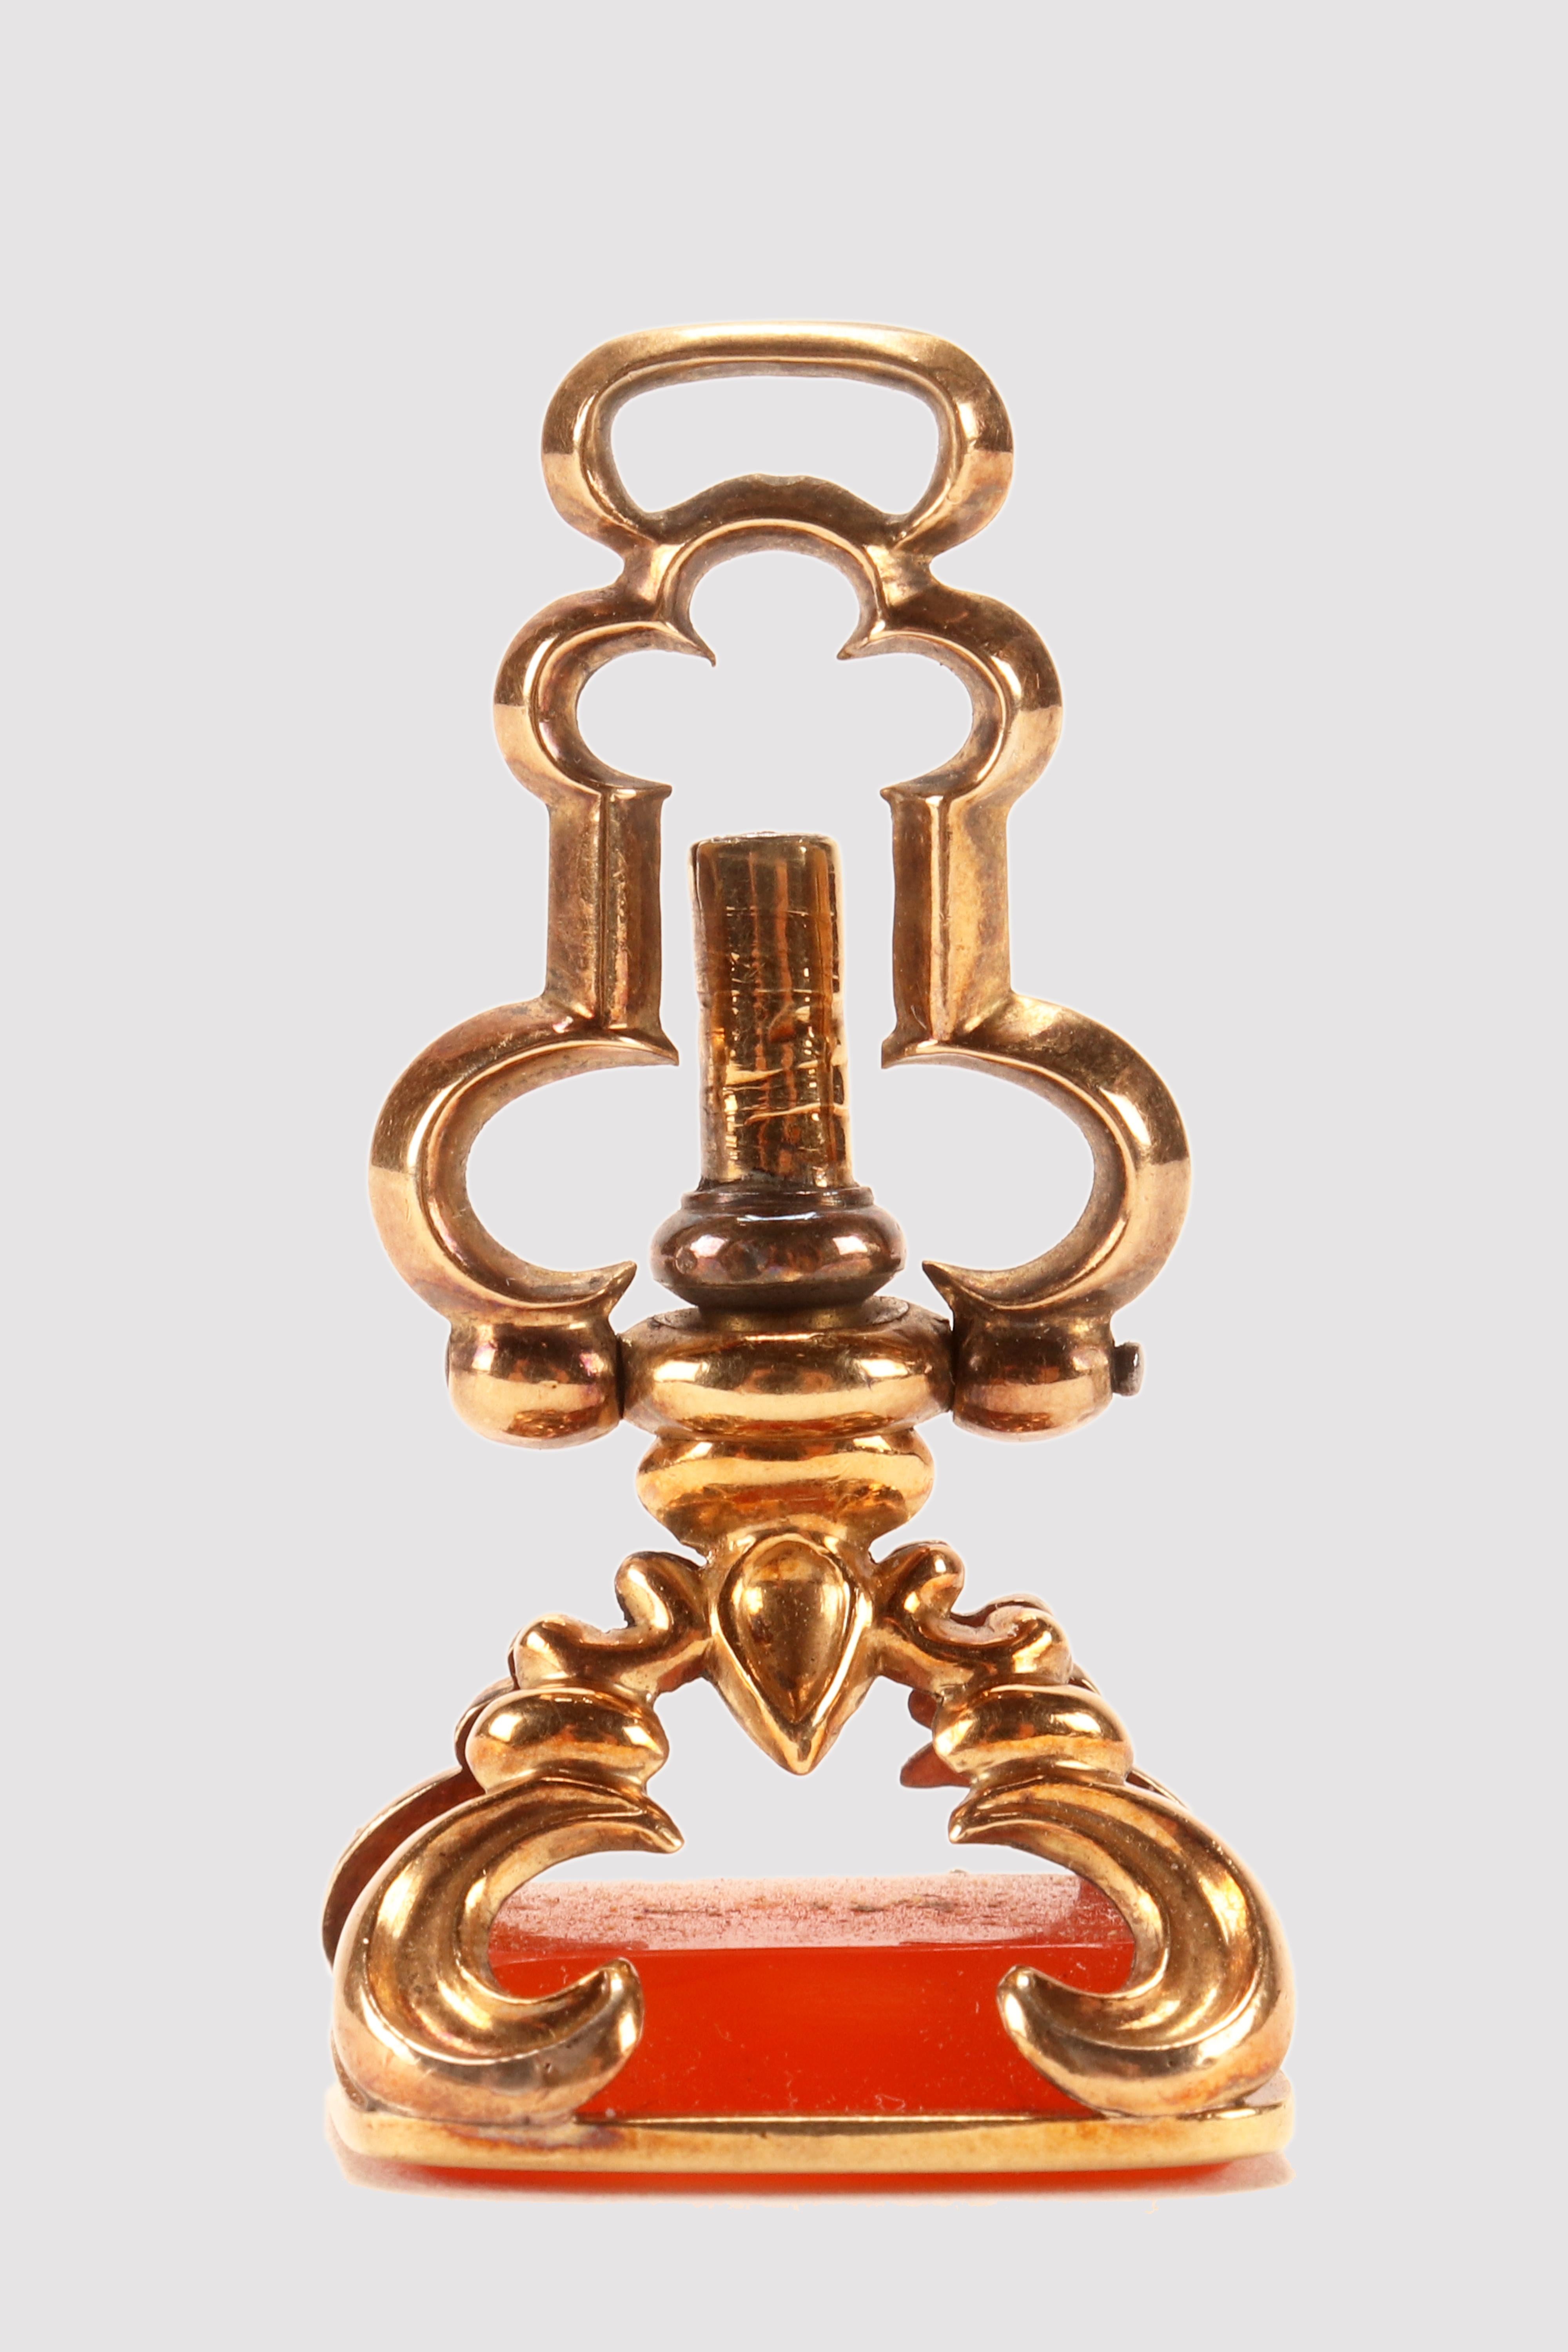 Antique 14 Kt. gold hidden watch key spinning carnelian seal.
The matrix is made out of Cornelian never engraved, and rectangular shaped with beveled edges. A plane gold fascia embraces the cornelian rim and two gold bridge joints at the vertex,